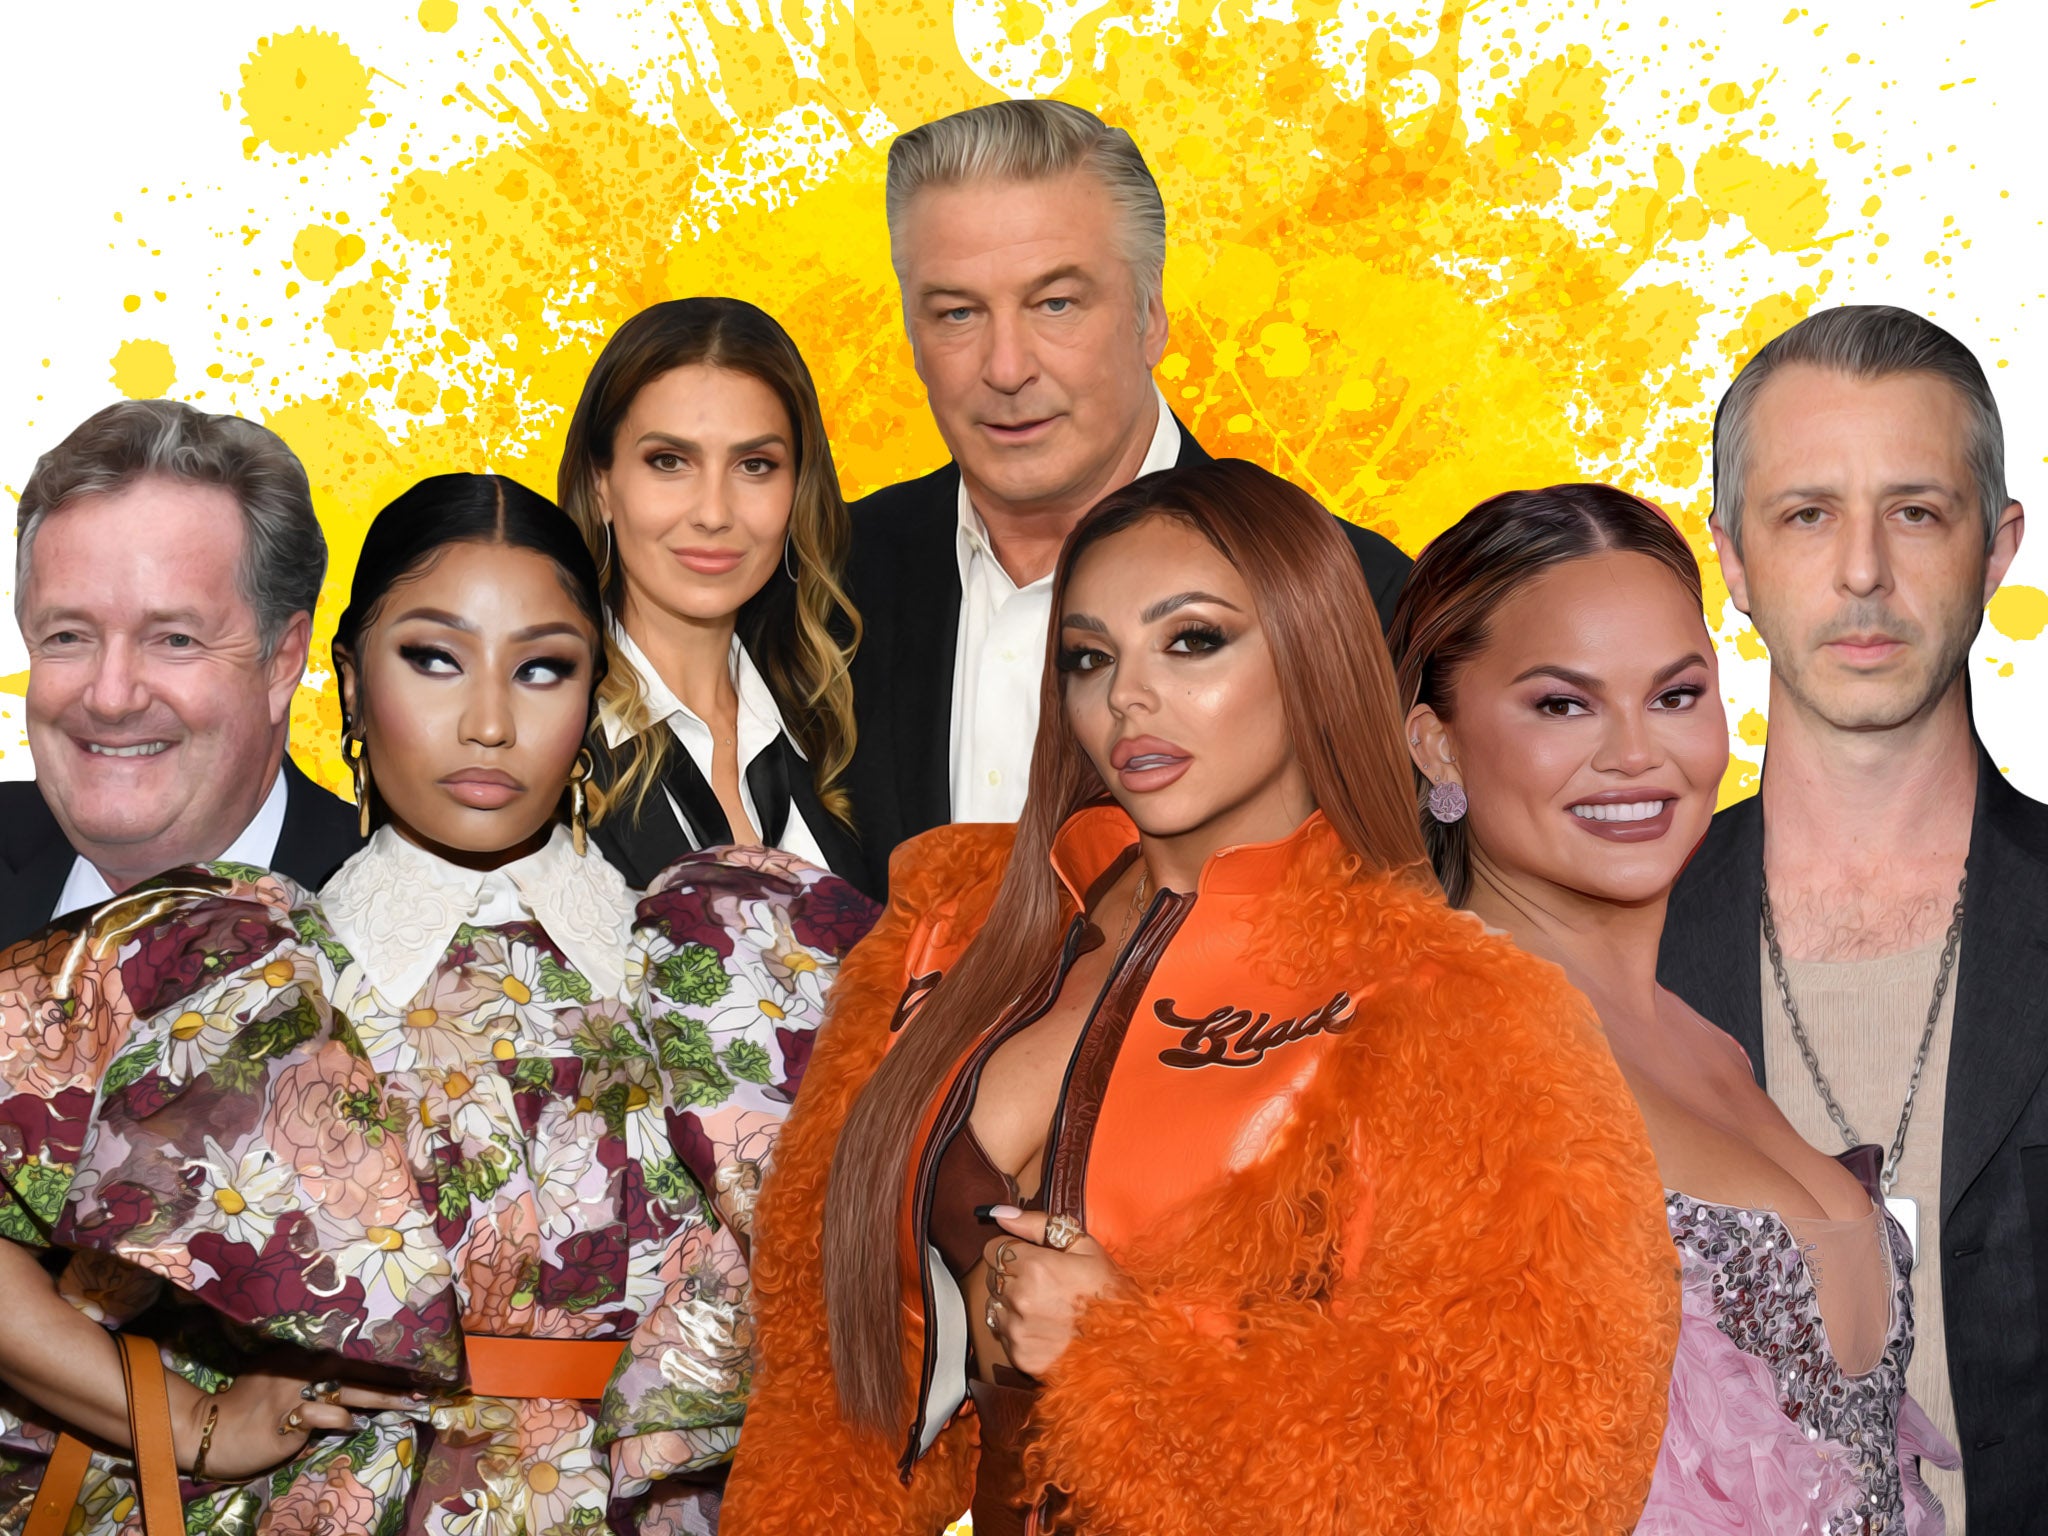 A who’s who of 2021: (from left) Piers Morgan, Nicki Minaj, Hilaria and Alec Baldwin, Jesy Nelson, Chrissy Teigen and Jeremy Strong